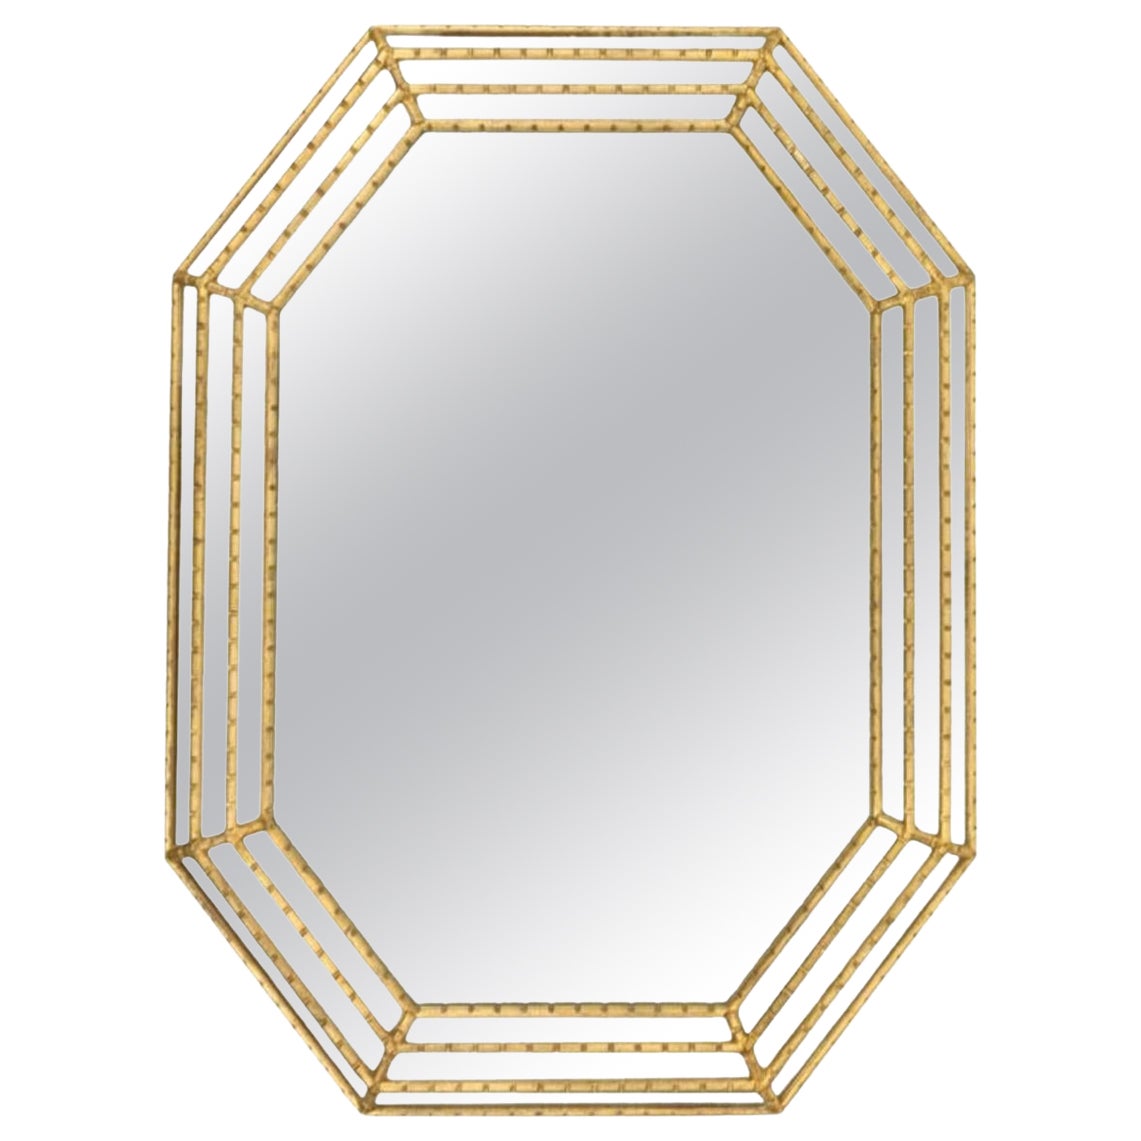 Labarge Gold Faux Bamboo Mirror